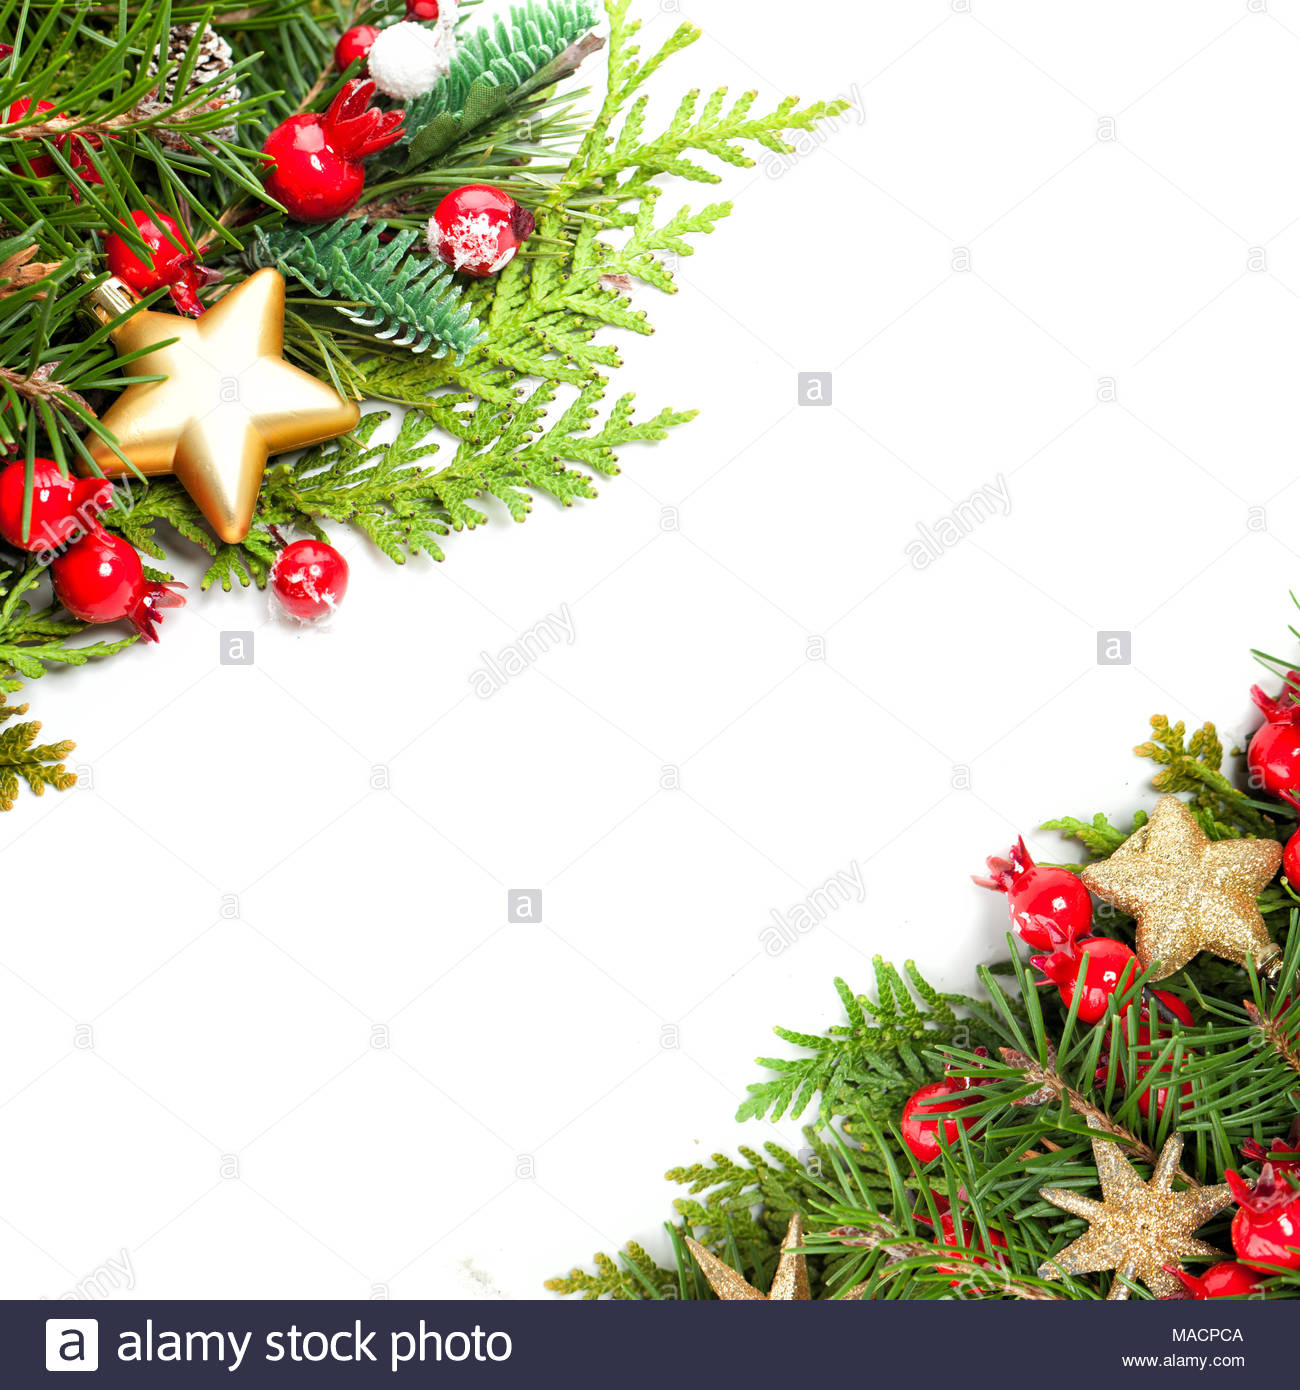 Beautiful Christmas Background With Xmas Tree Twig Red Holly